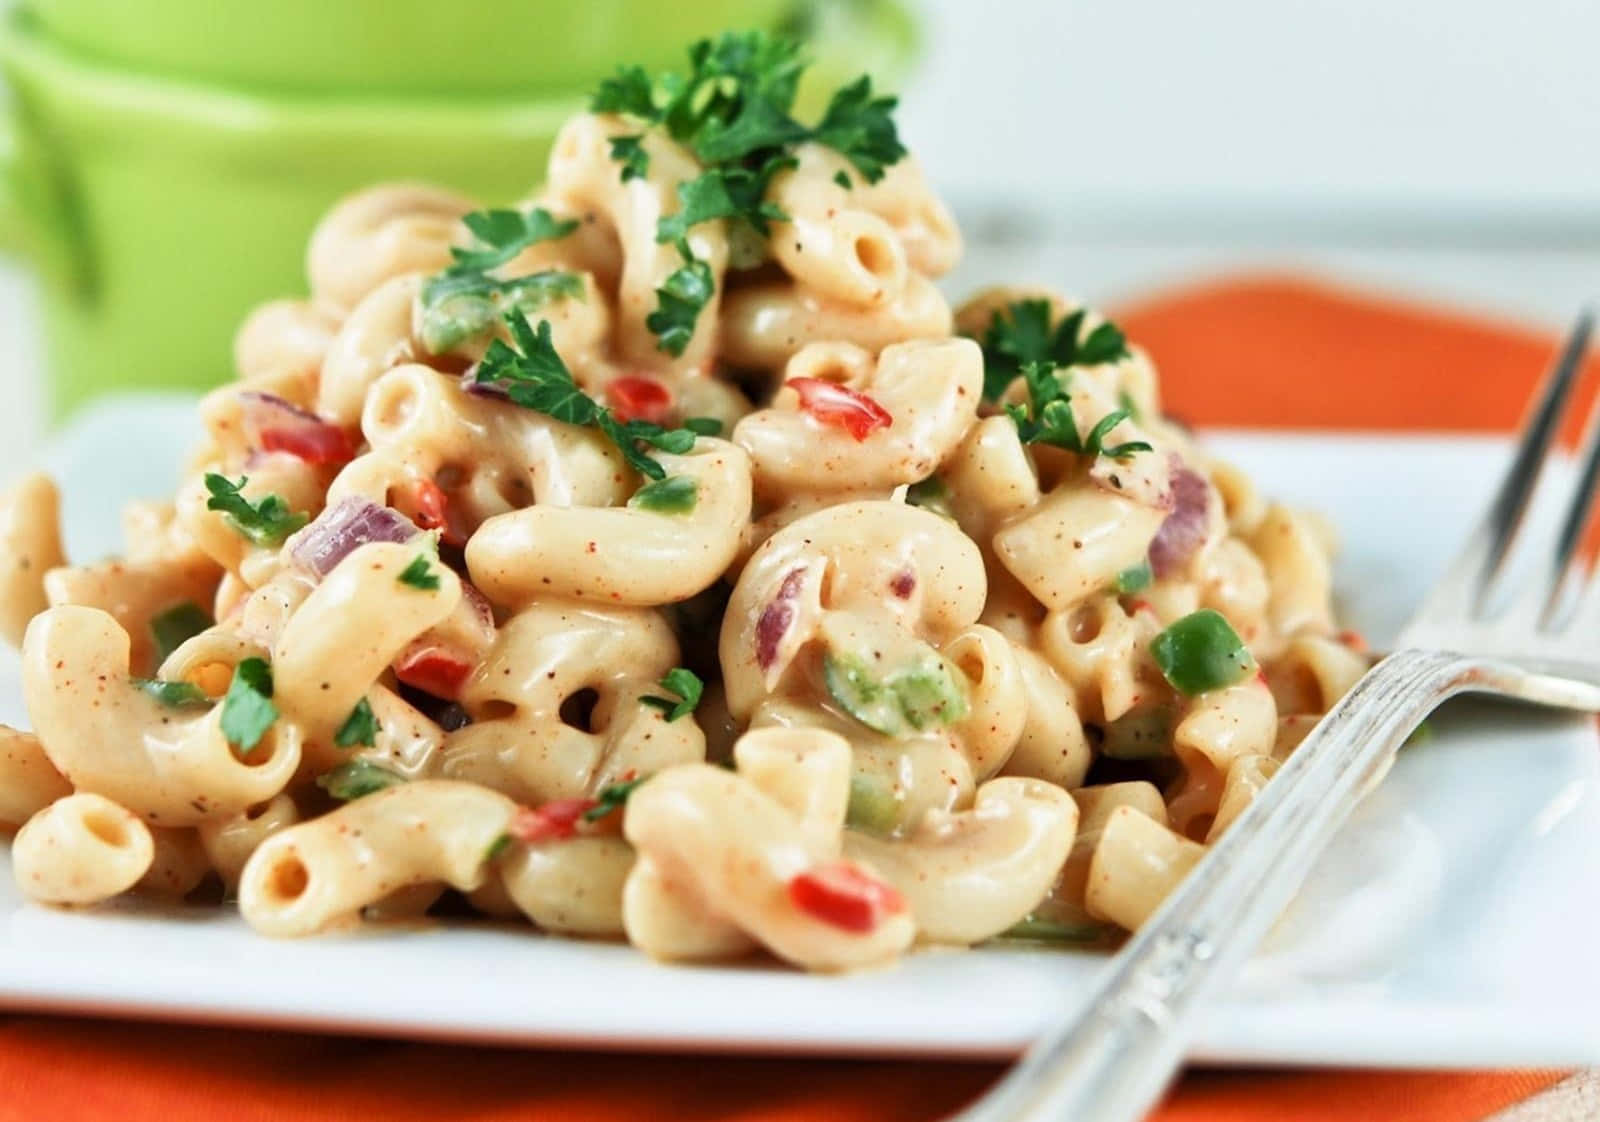 Macaroni Salad With Peppers And Parsley